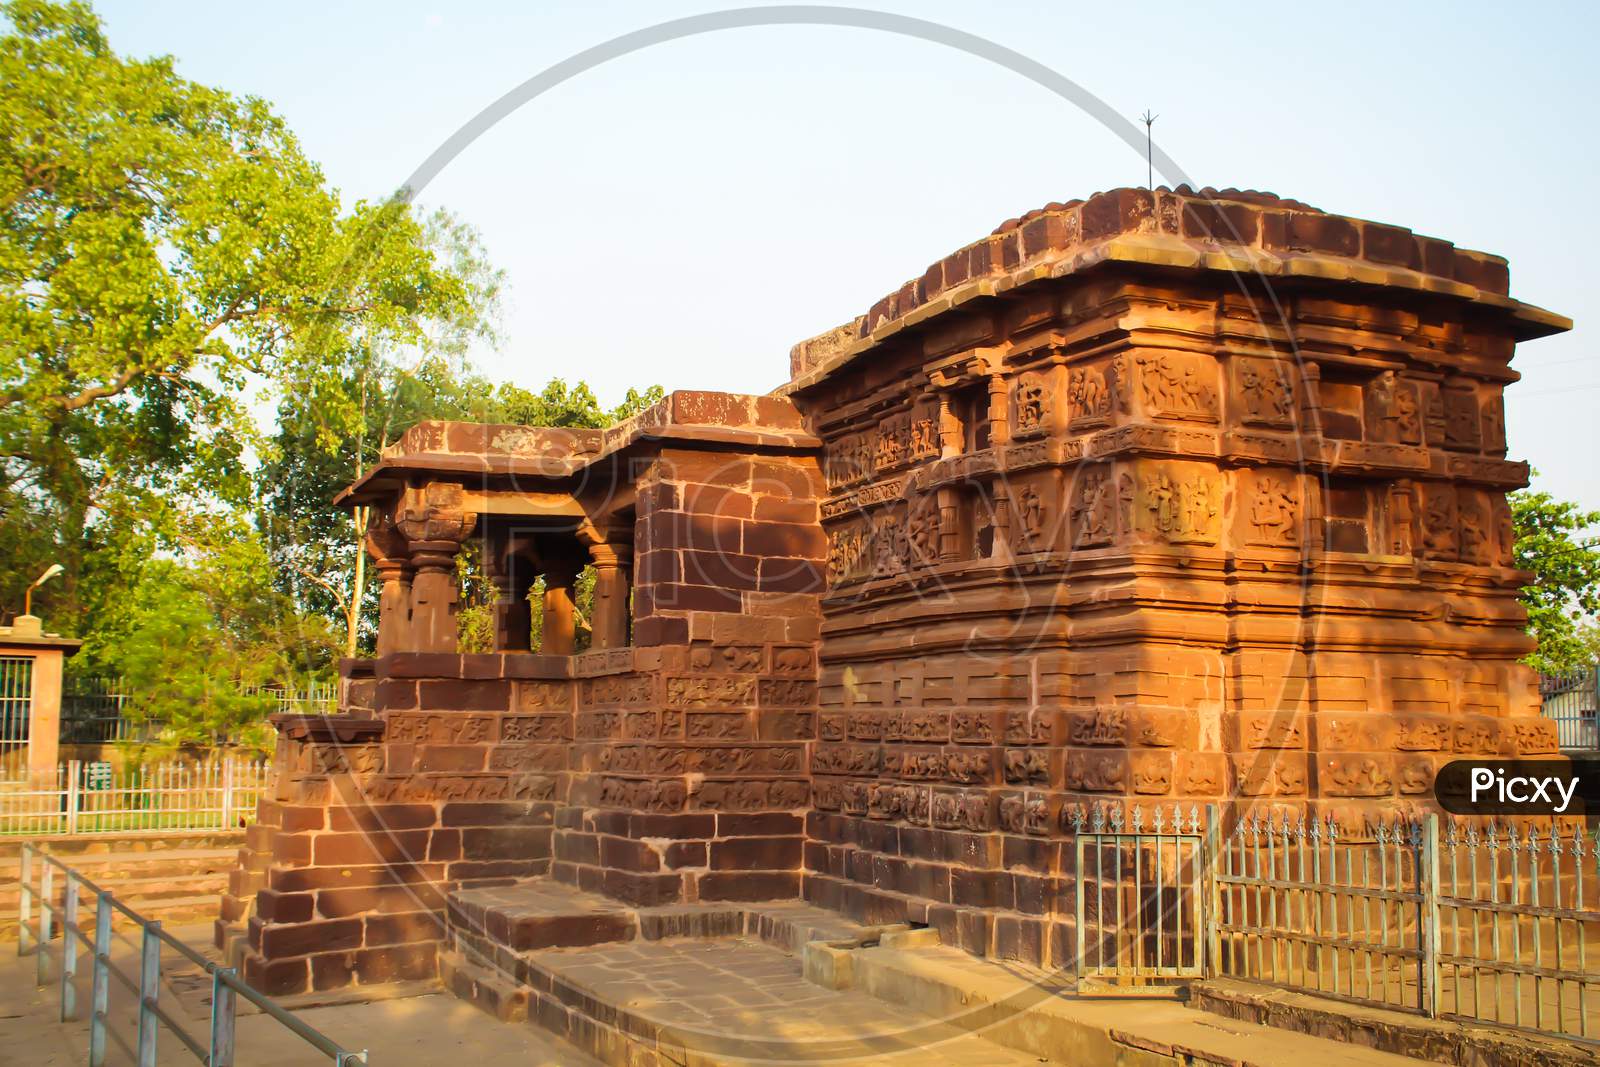 Shiva Temple At Dev Baloda Depicts The Stories Of Those Time. Situated In The District Of Bhilai, Chattisgarh Tourism, India